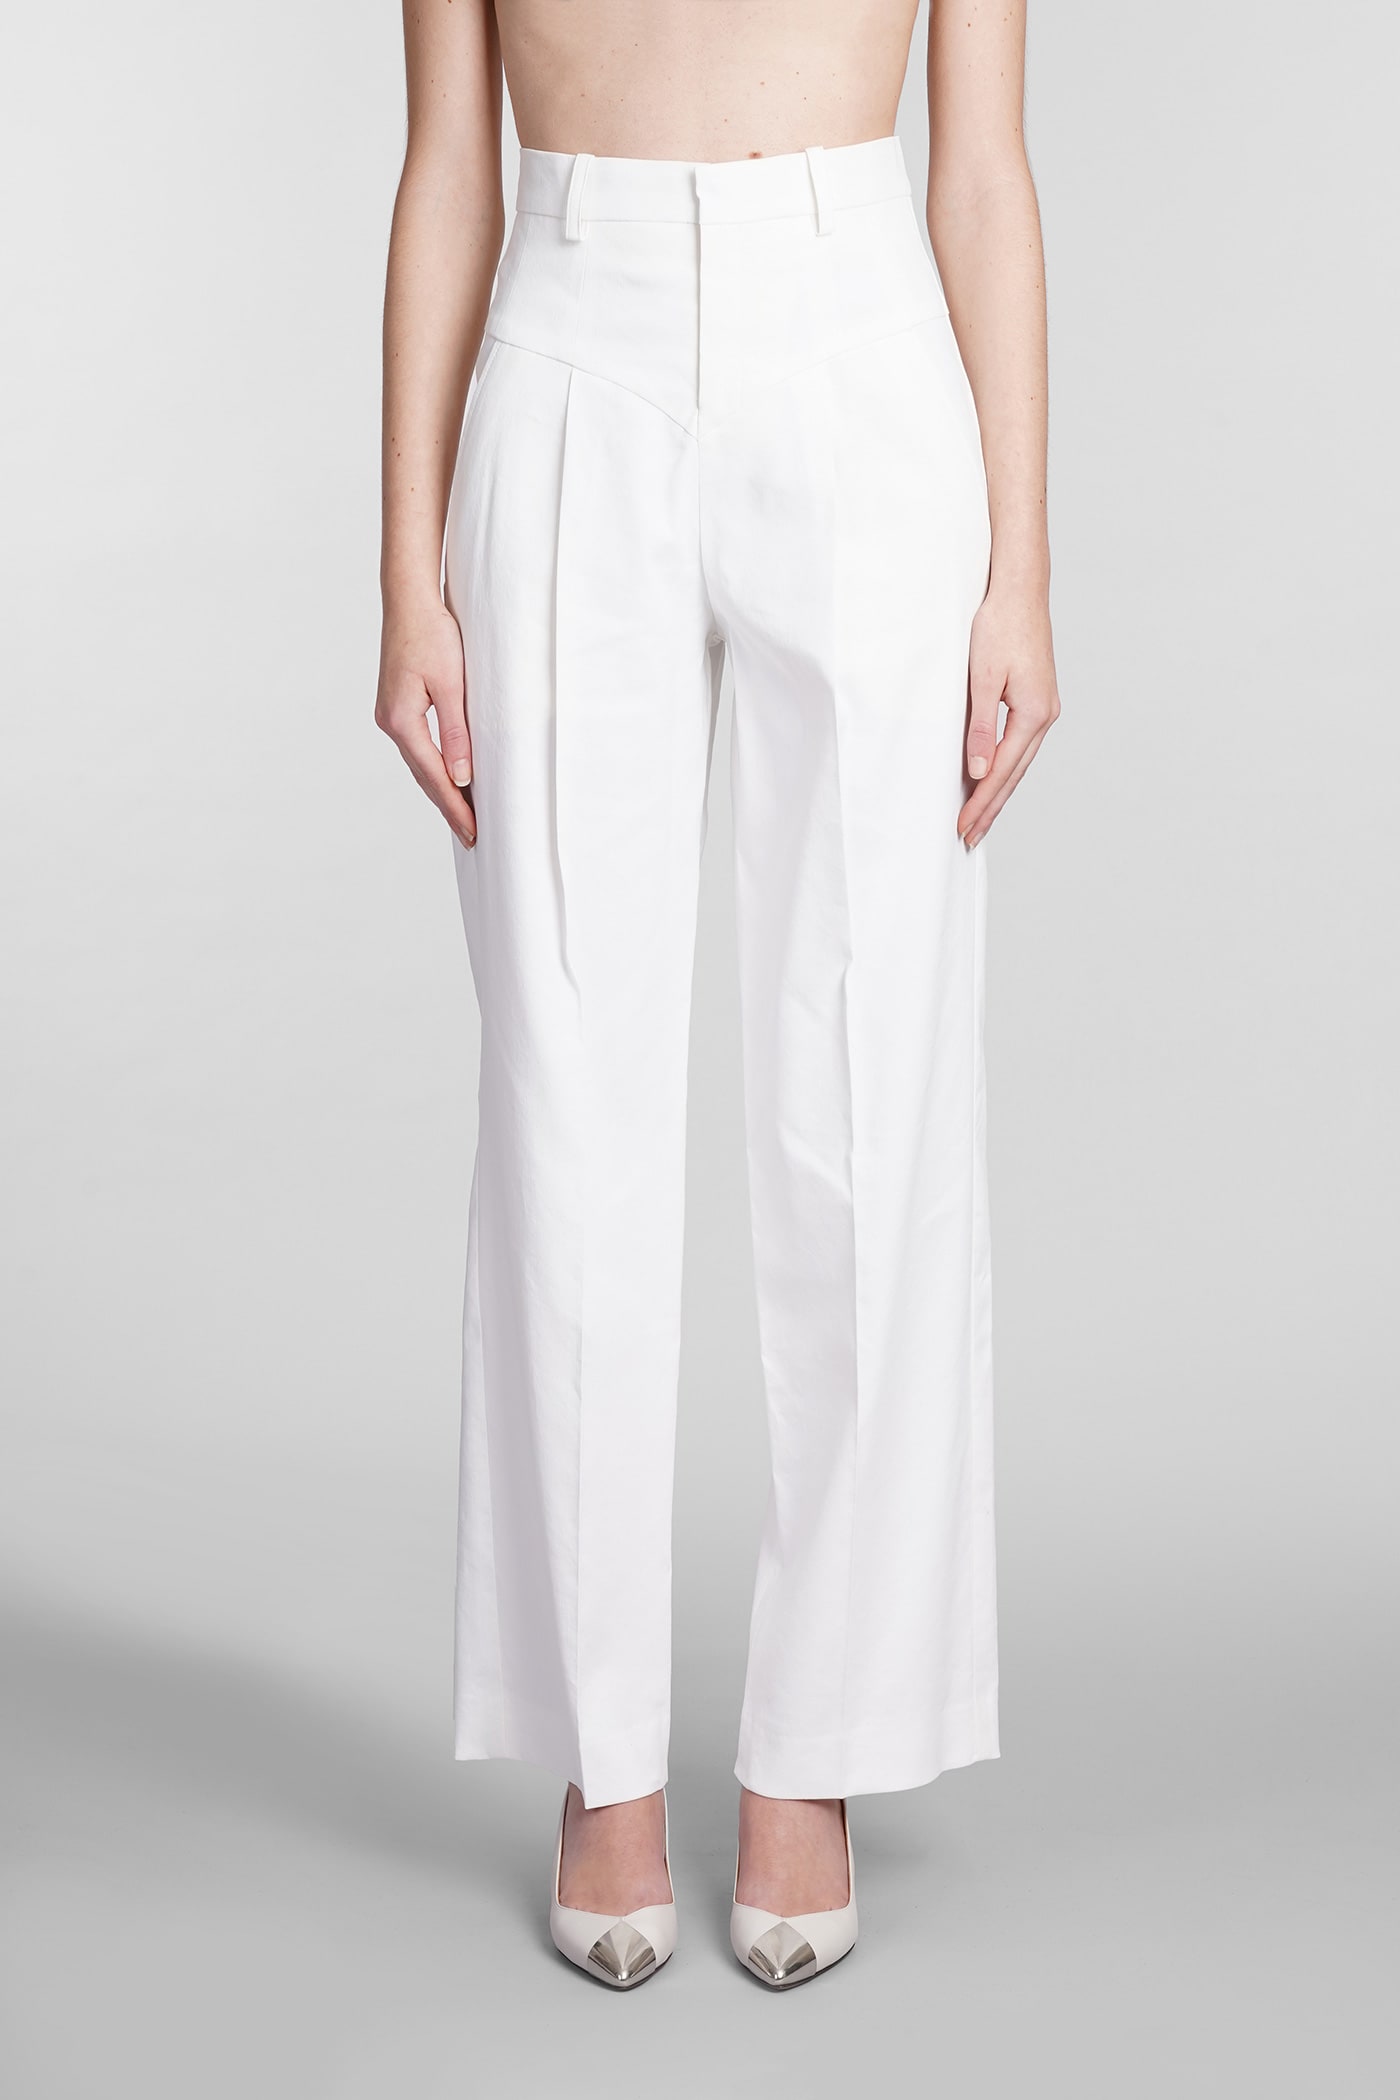 Isabel Marant Staya Pants In White Cotton